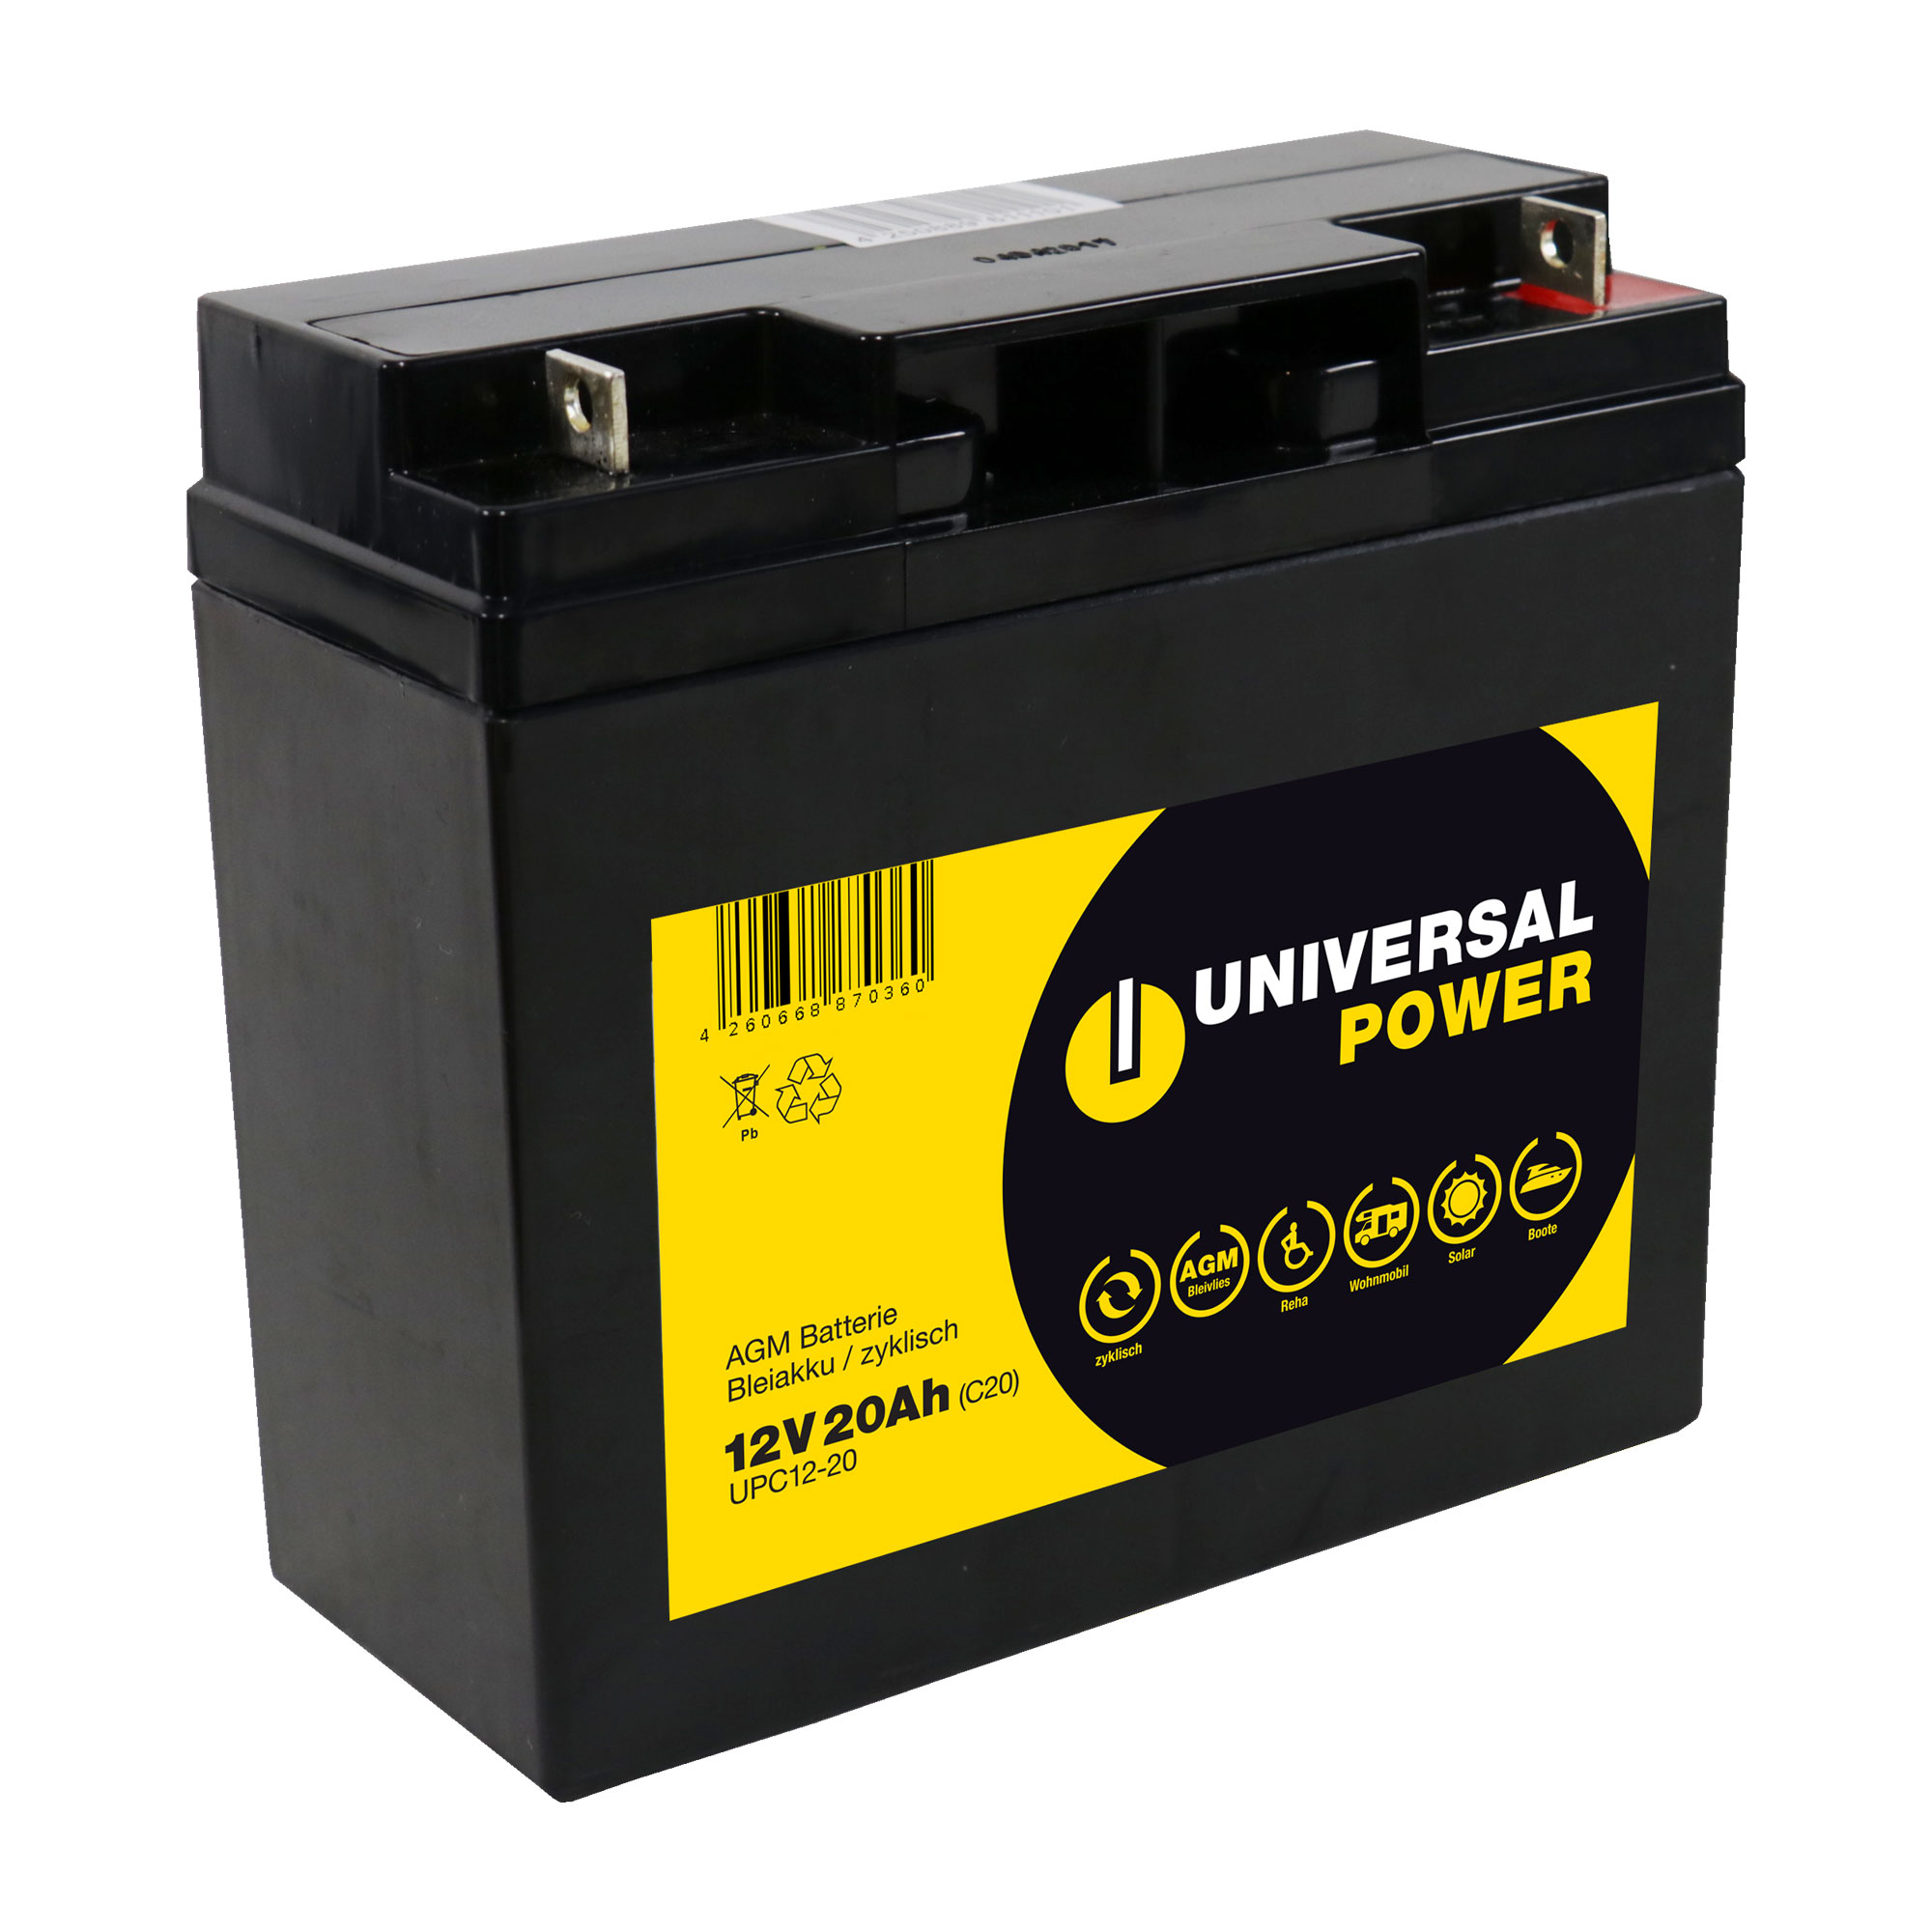 Universal Power AGM UPC12-20 12V 20Ah AGM Batterie zyklenfest wartungsfrei